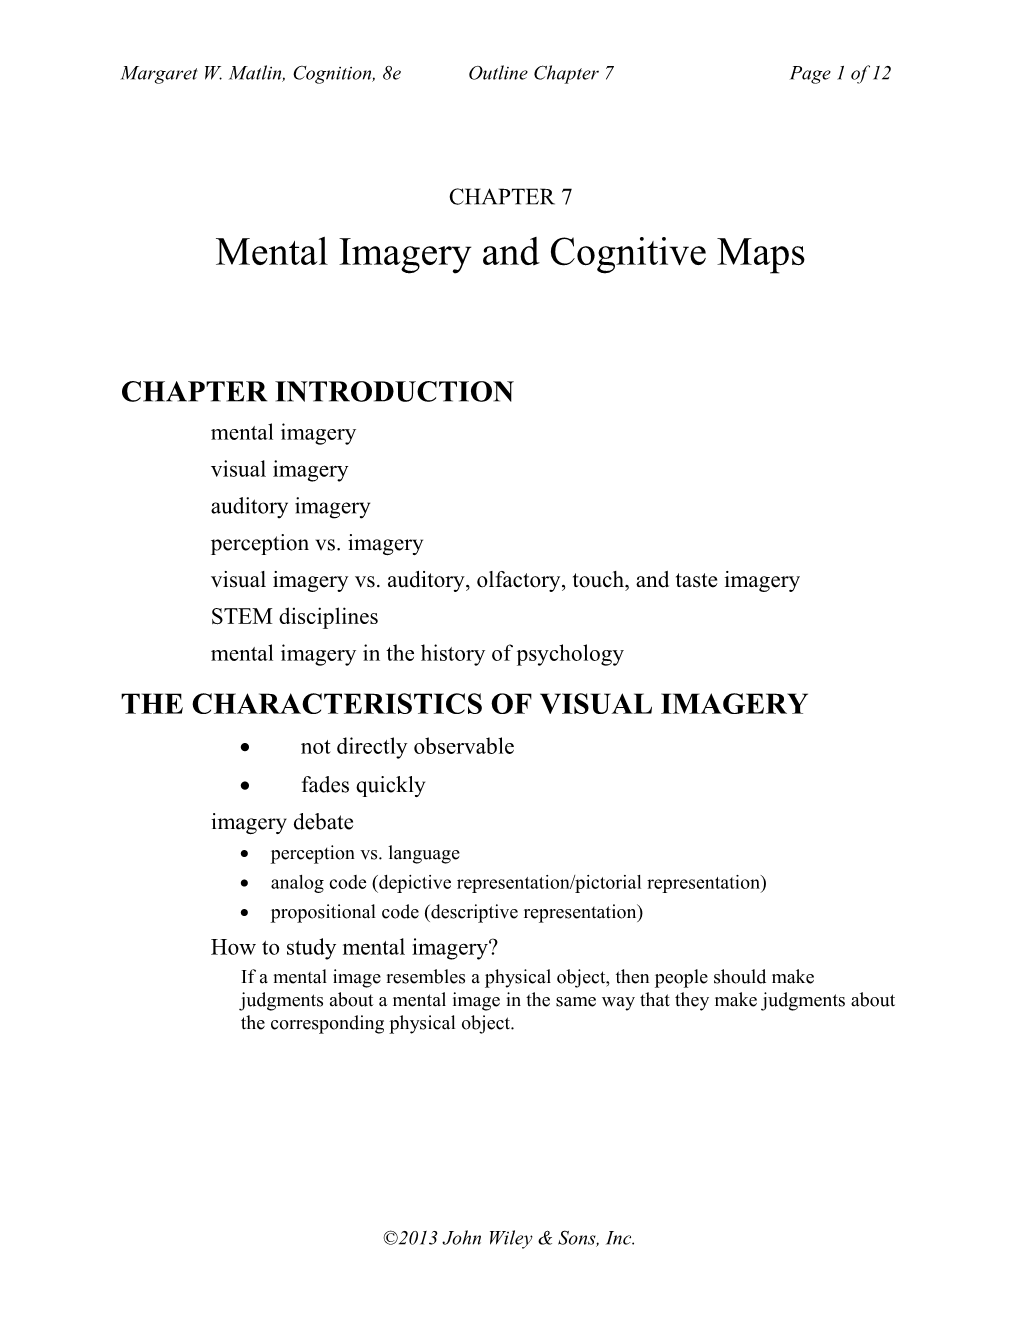 Mental Imagery and Cognitive Maps